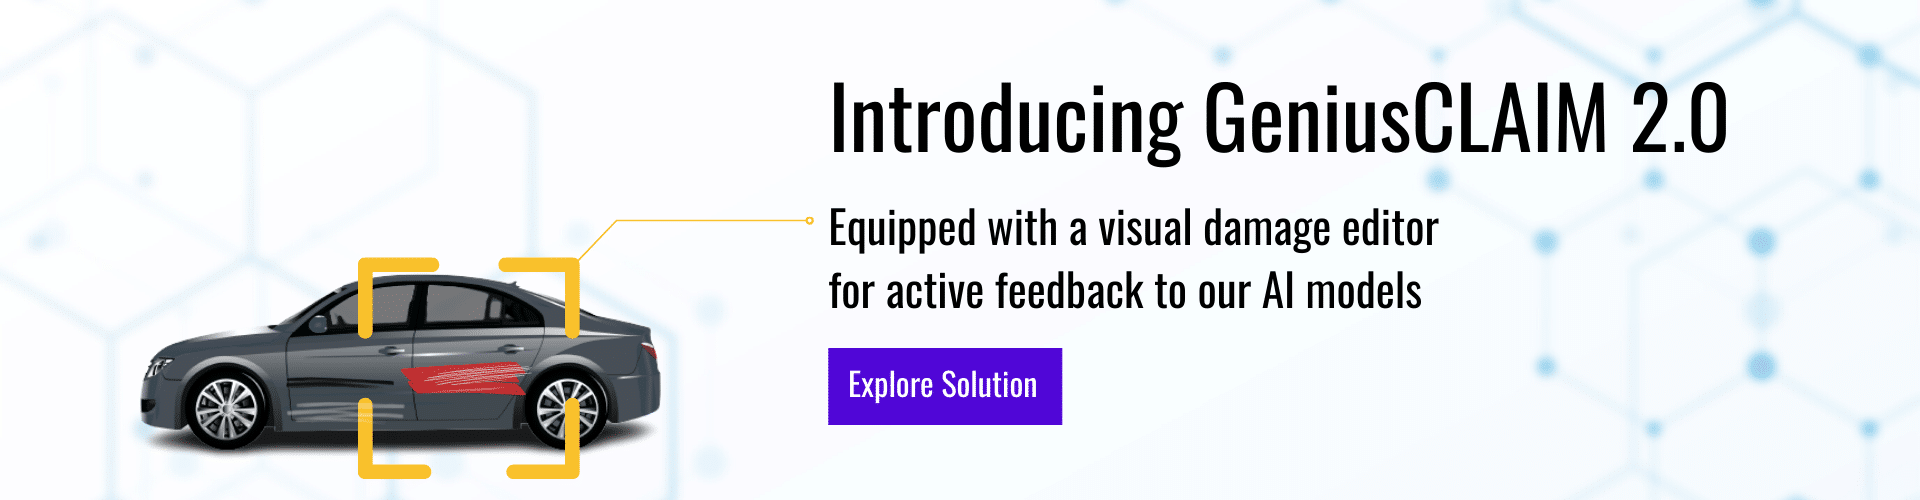 GeniusCLAIM 2.0 - Equipped with a visual damage editor for active feedback to our AI models